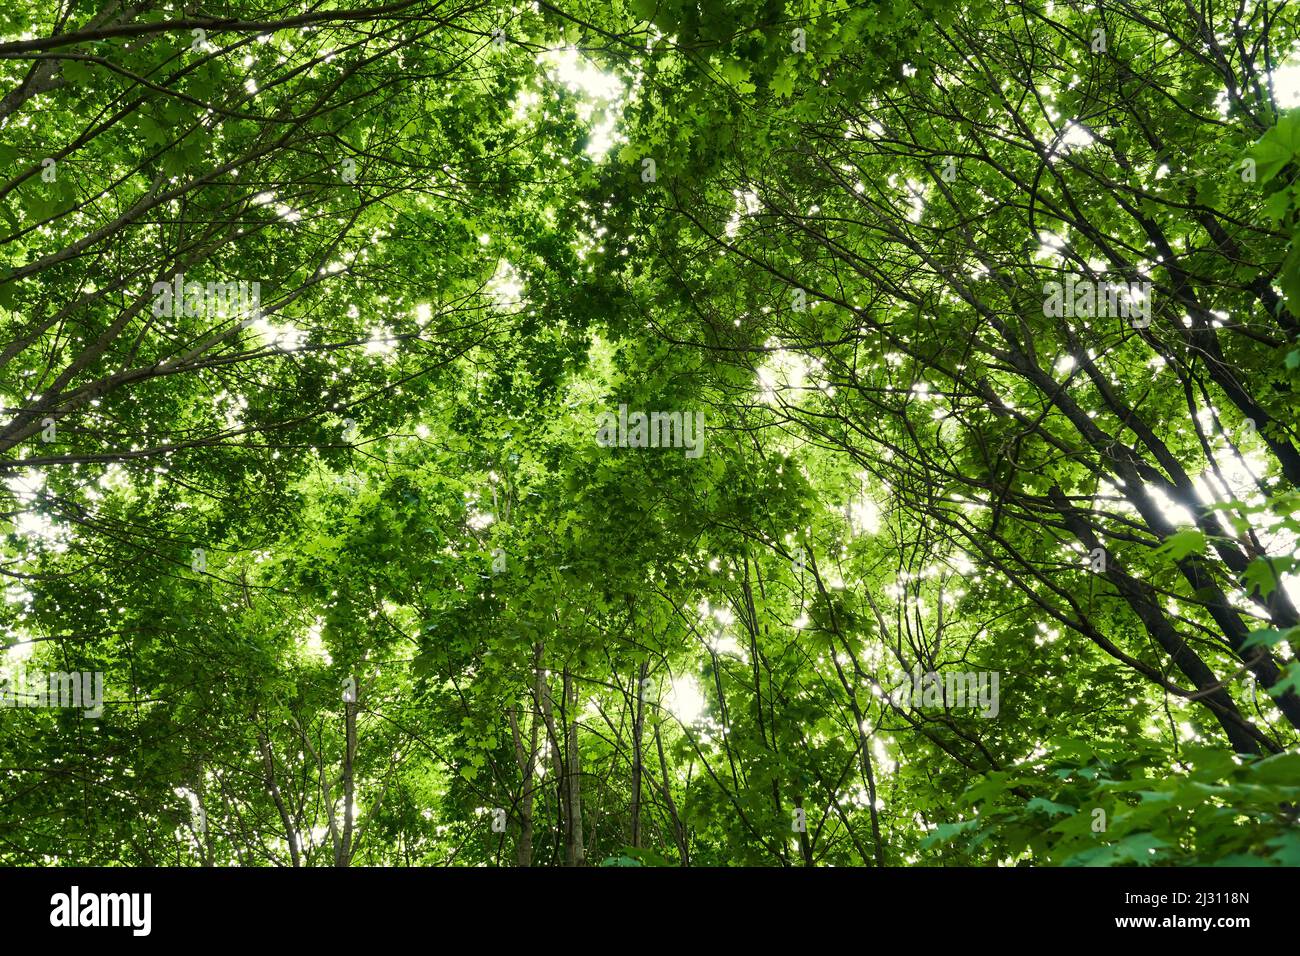 The sun shines through the foliage of dense tree crowns. Abstract nature backgrounds Stock Photo